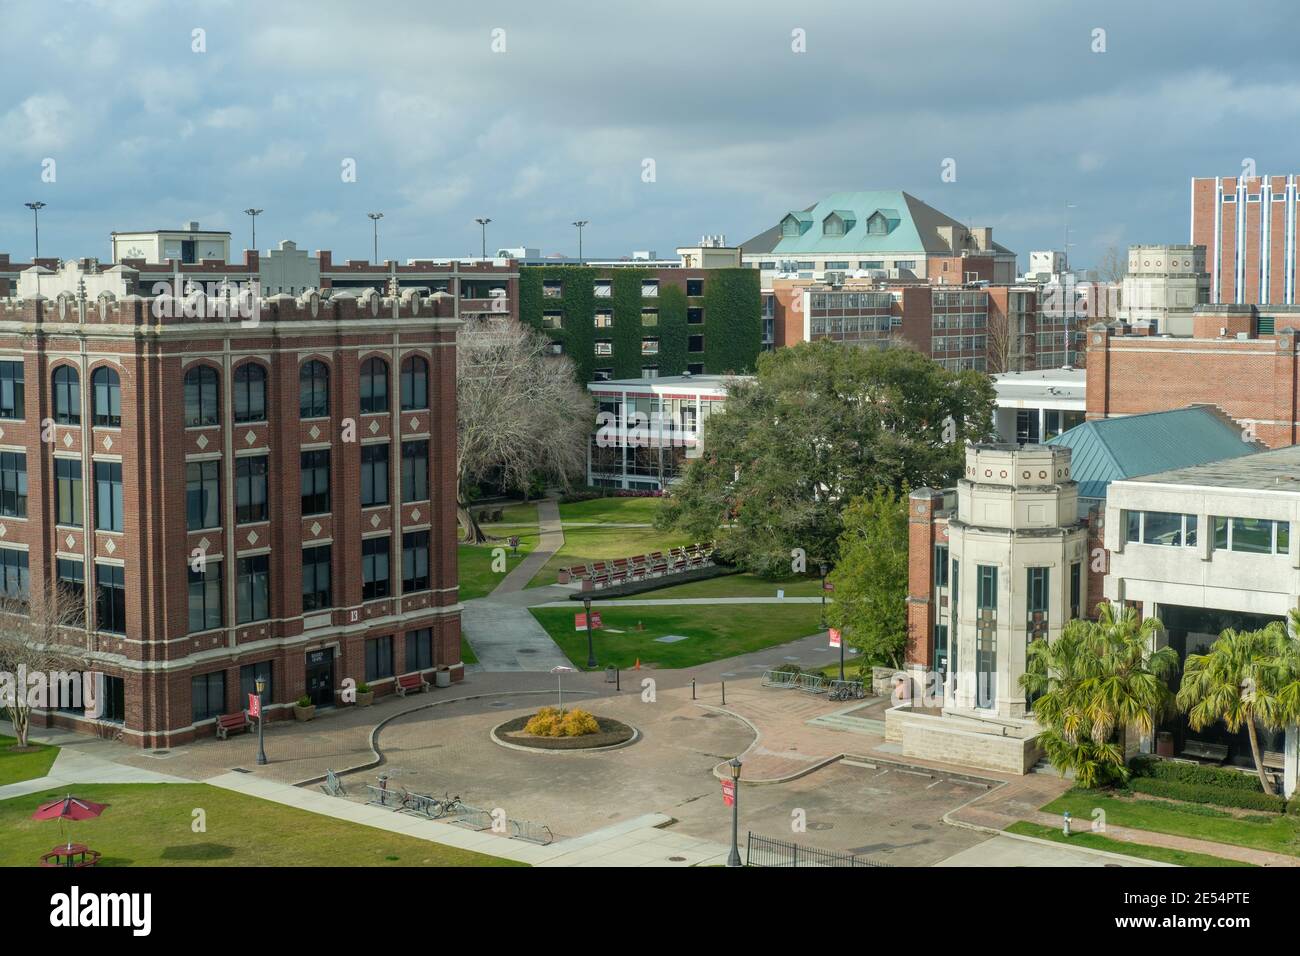 NEW ORLEANS, LA, USA - JANUARY 24, 2021: Aerial view of Loyola University buildings around the Peace Quad Stock Photo